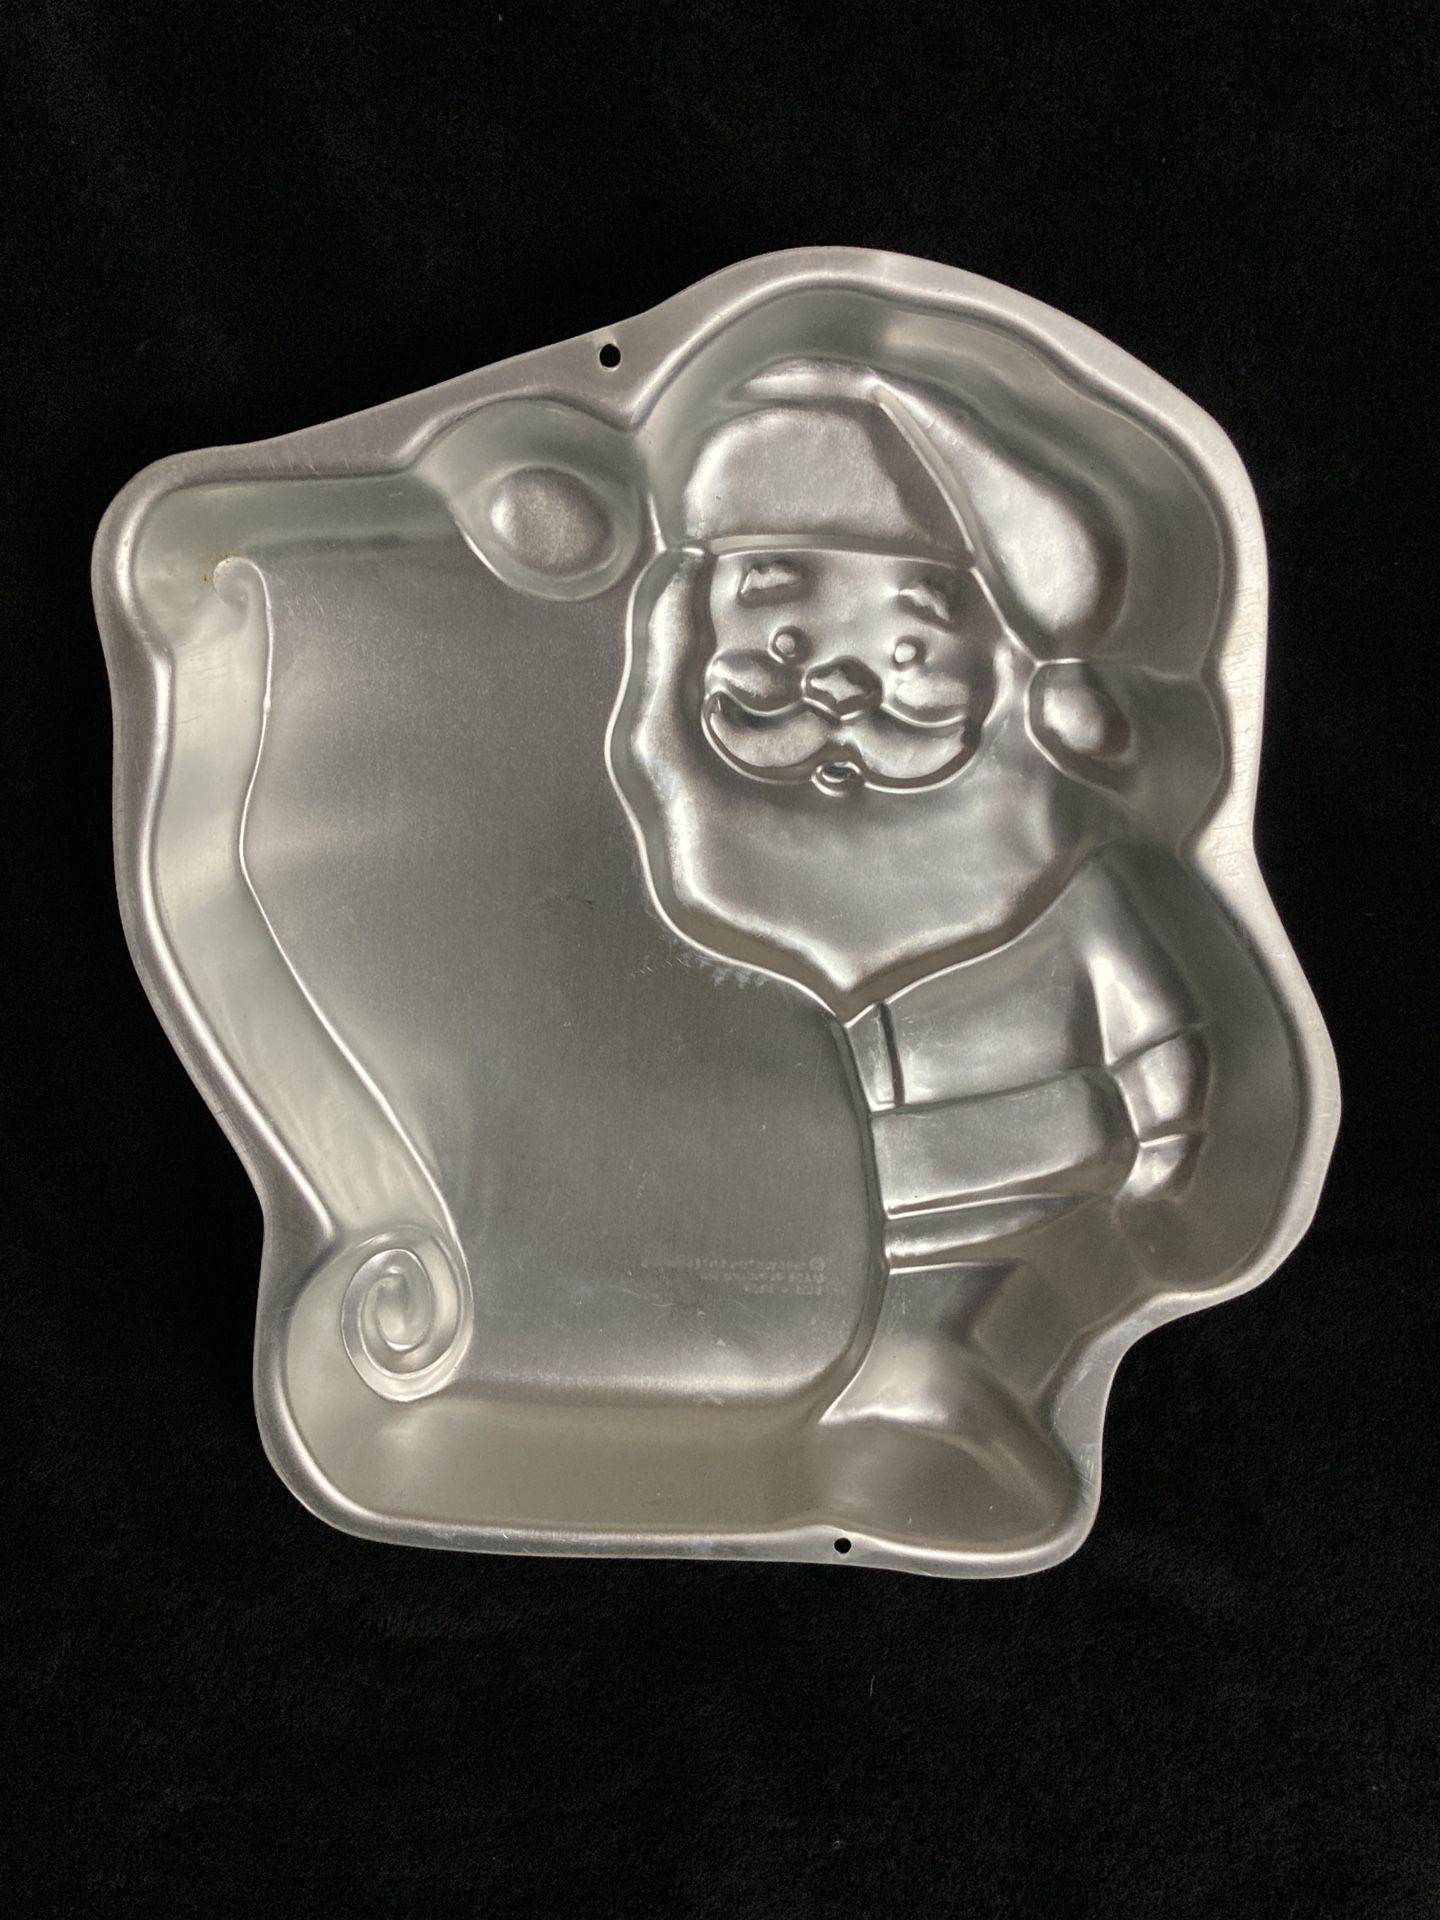 Three Wilson Christmas cake pans. 1 Santa, 1 Lg. tree, 1 Mold of six small  trees for Sale in Pinellas Park, FL - OfferUp